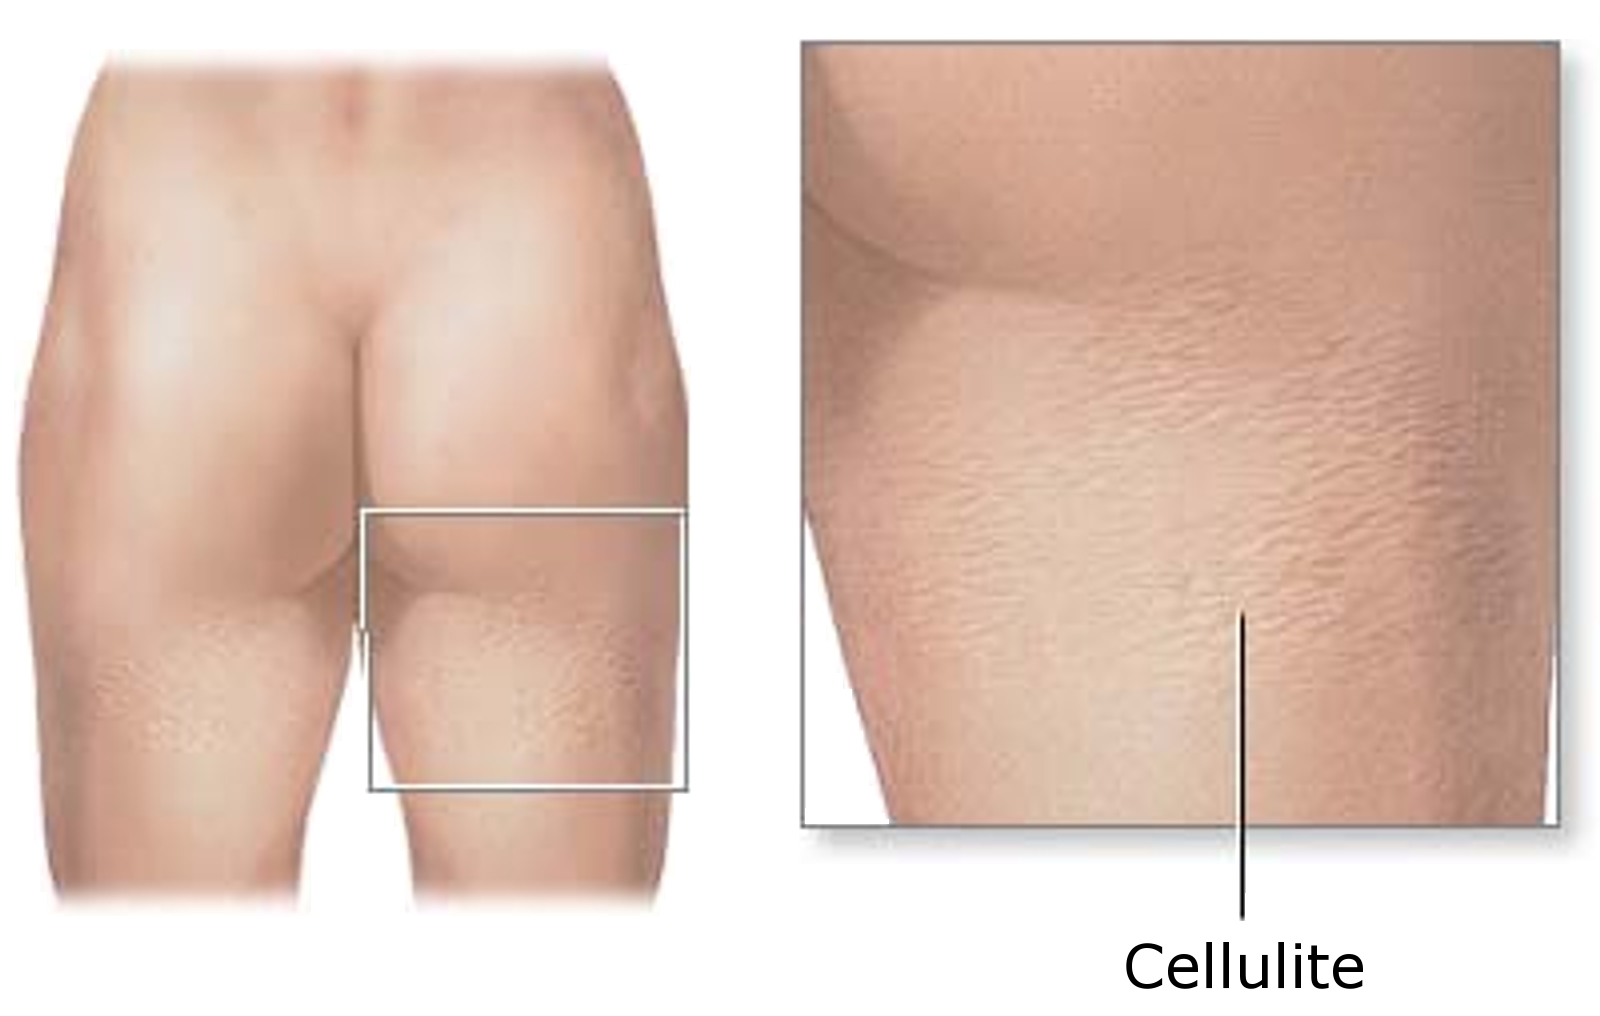 http://dic.academic.ru/pictures/wiki/files/67/Cellulite-2.jpg